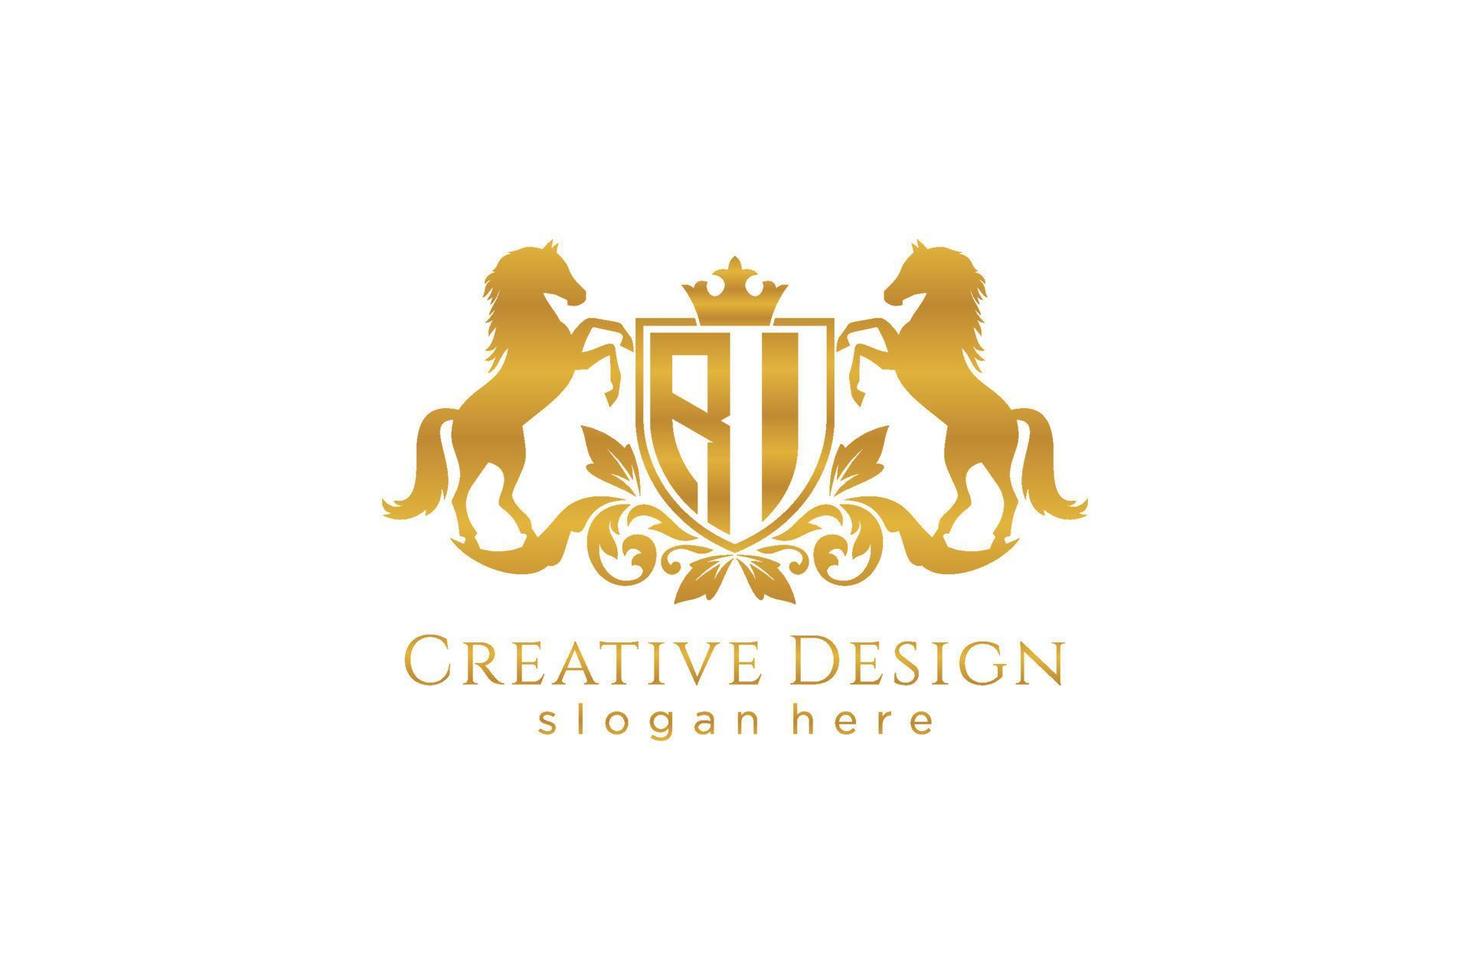 initial RI Retro golden crest with shield and two horses, badge template with scrolls and royal crown - perfect for luxurious branding projects vector